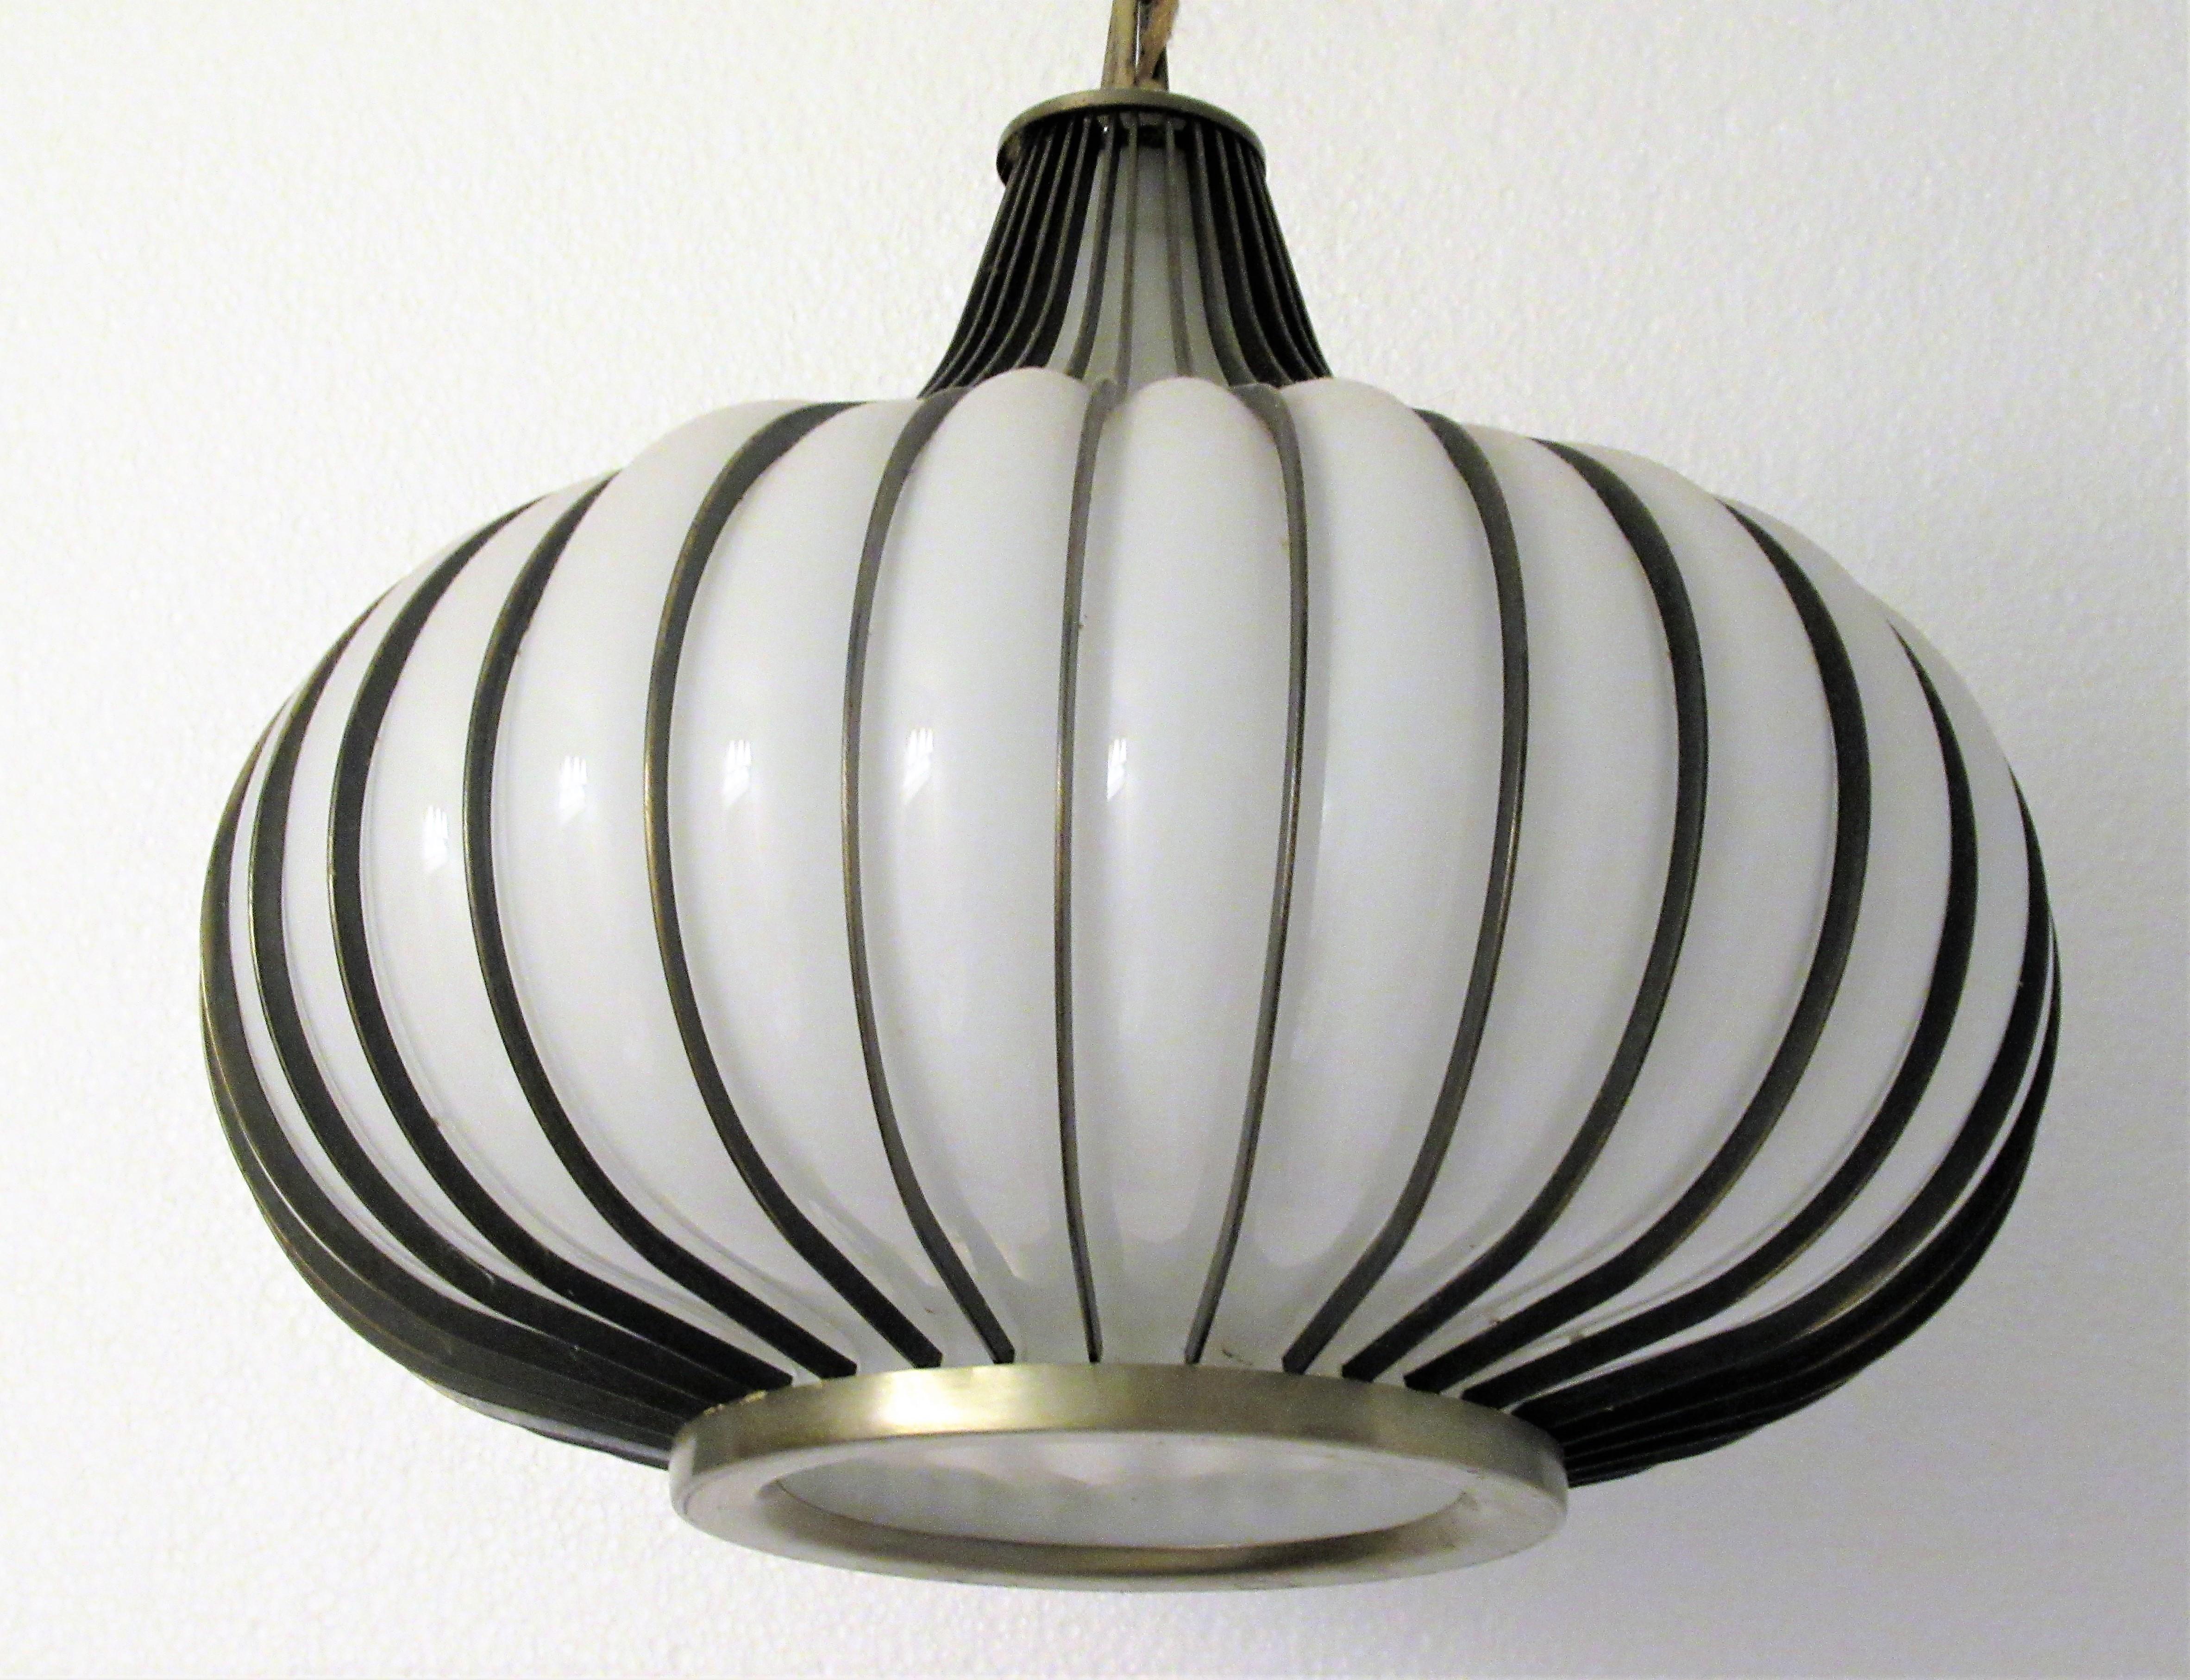 Brass-plated metal and blown white glass modernist ribbed onion form pendant chandelier by Lightcraft of California. An exceptionally beautiful sleek sculptural design, circa 1960-1970.